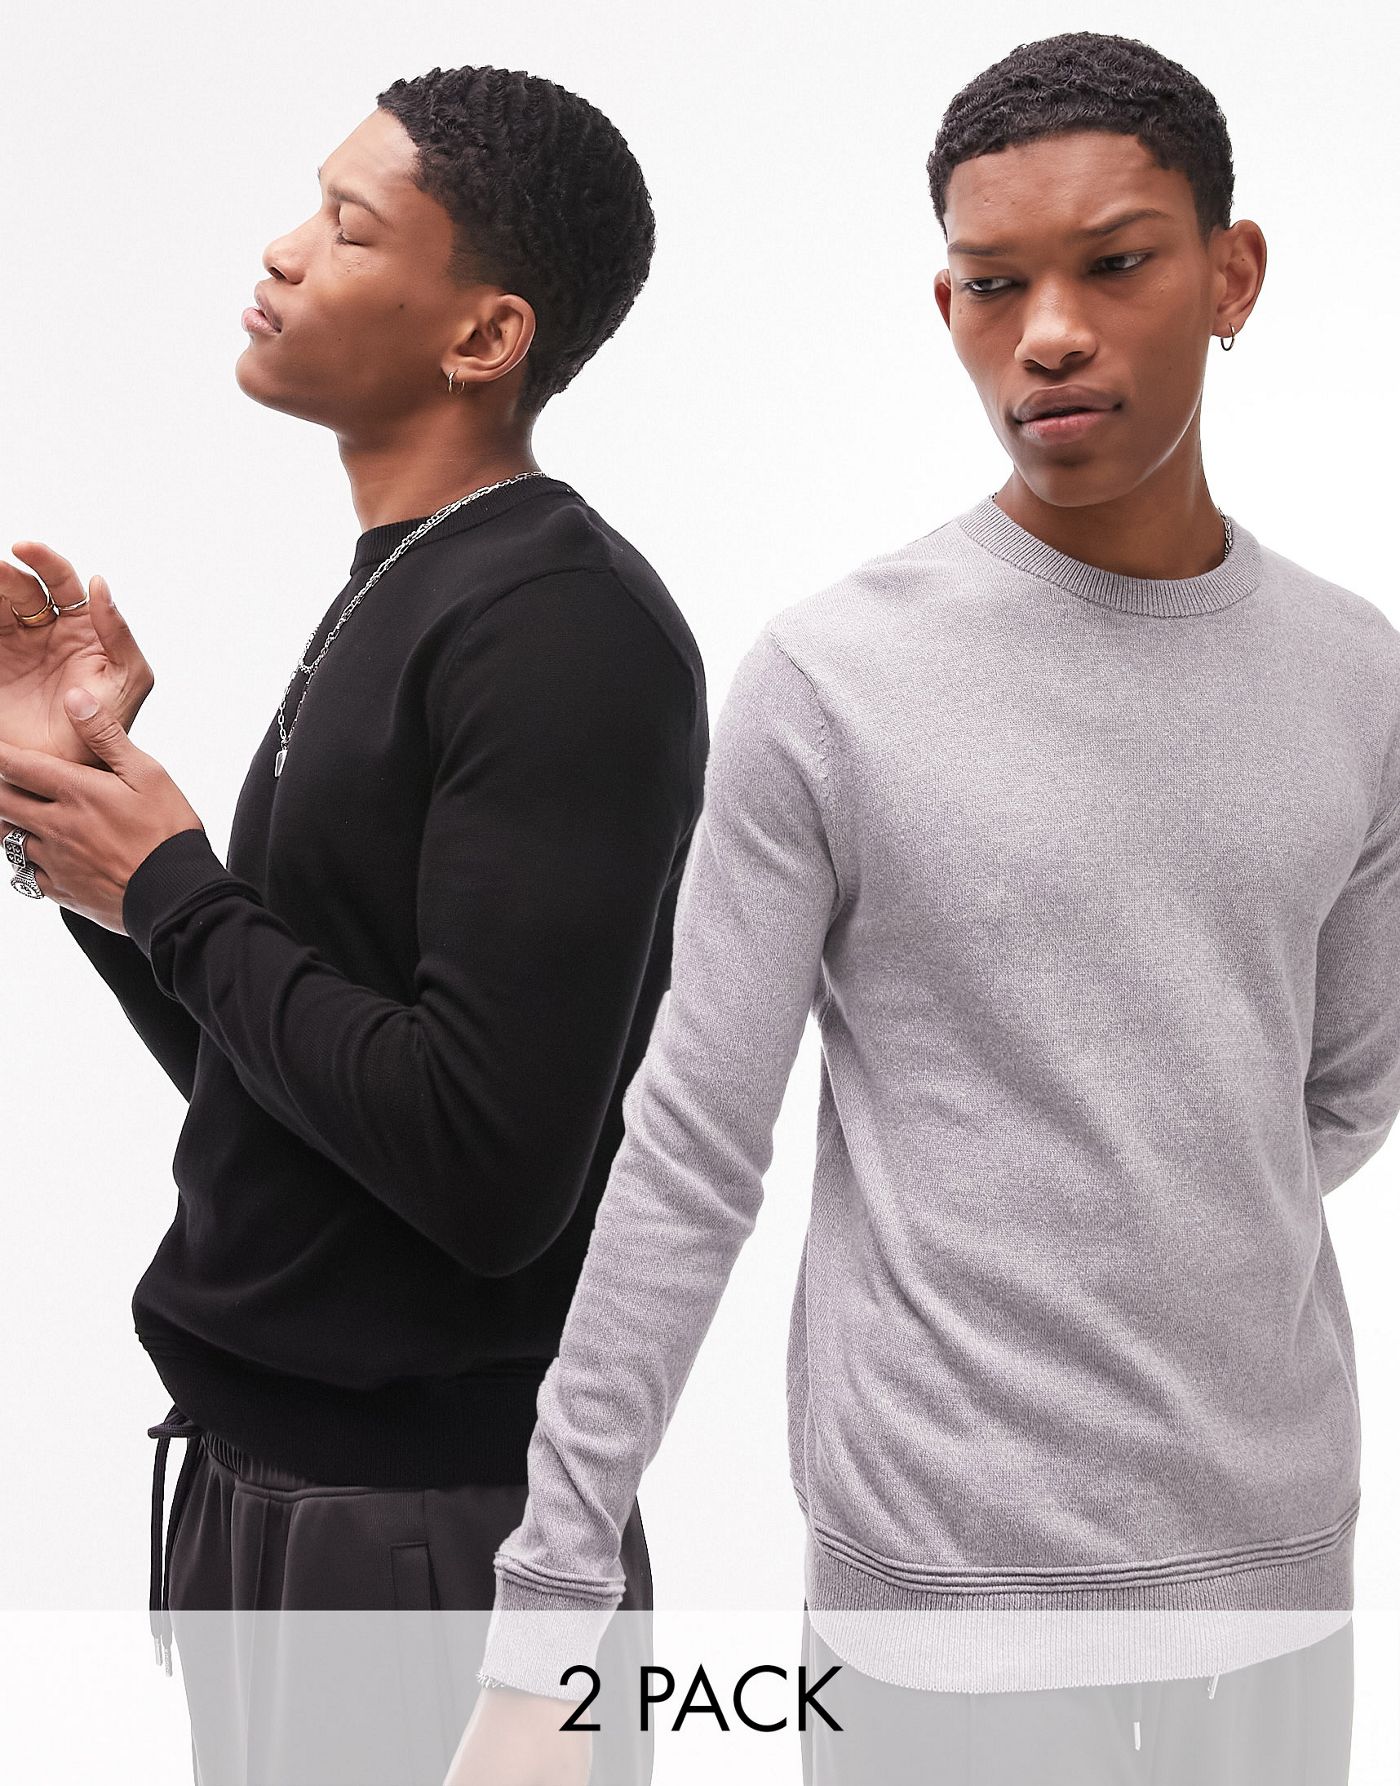 Topman essential knitted crew neck jumper multipack in black and grey